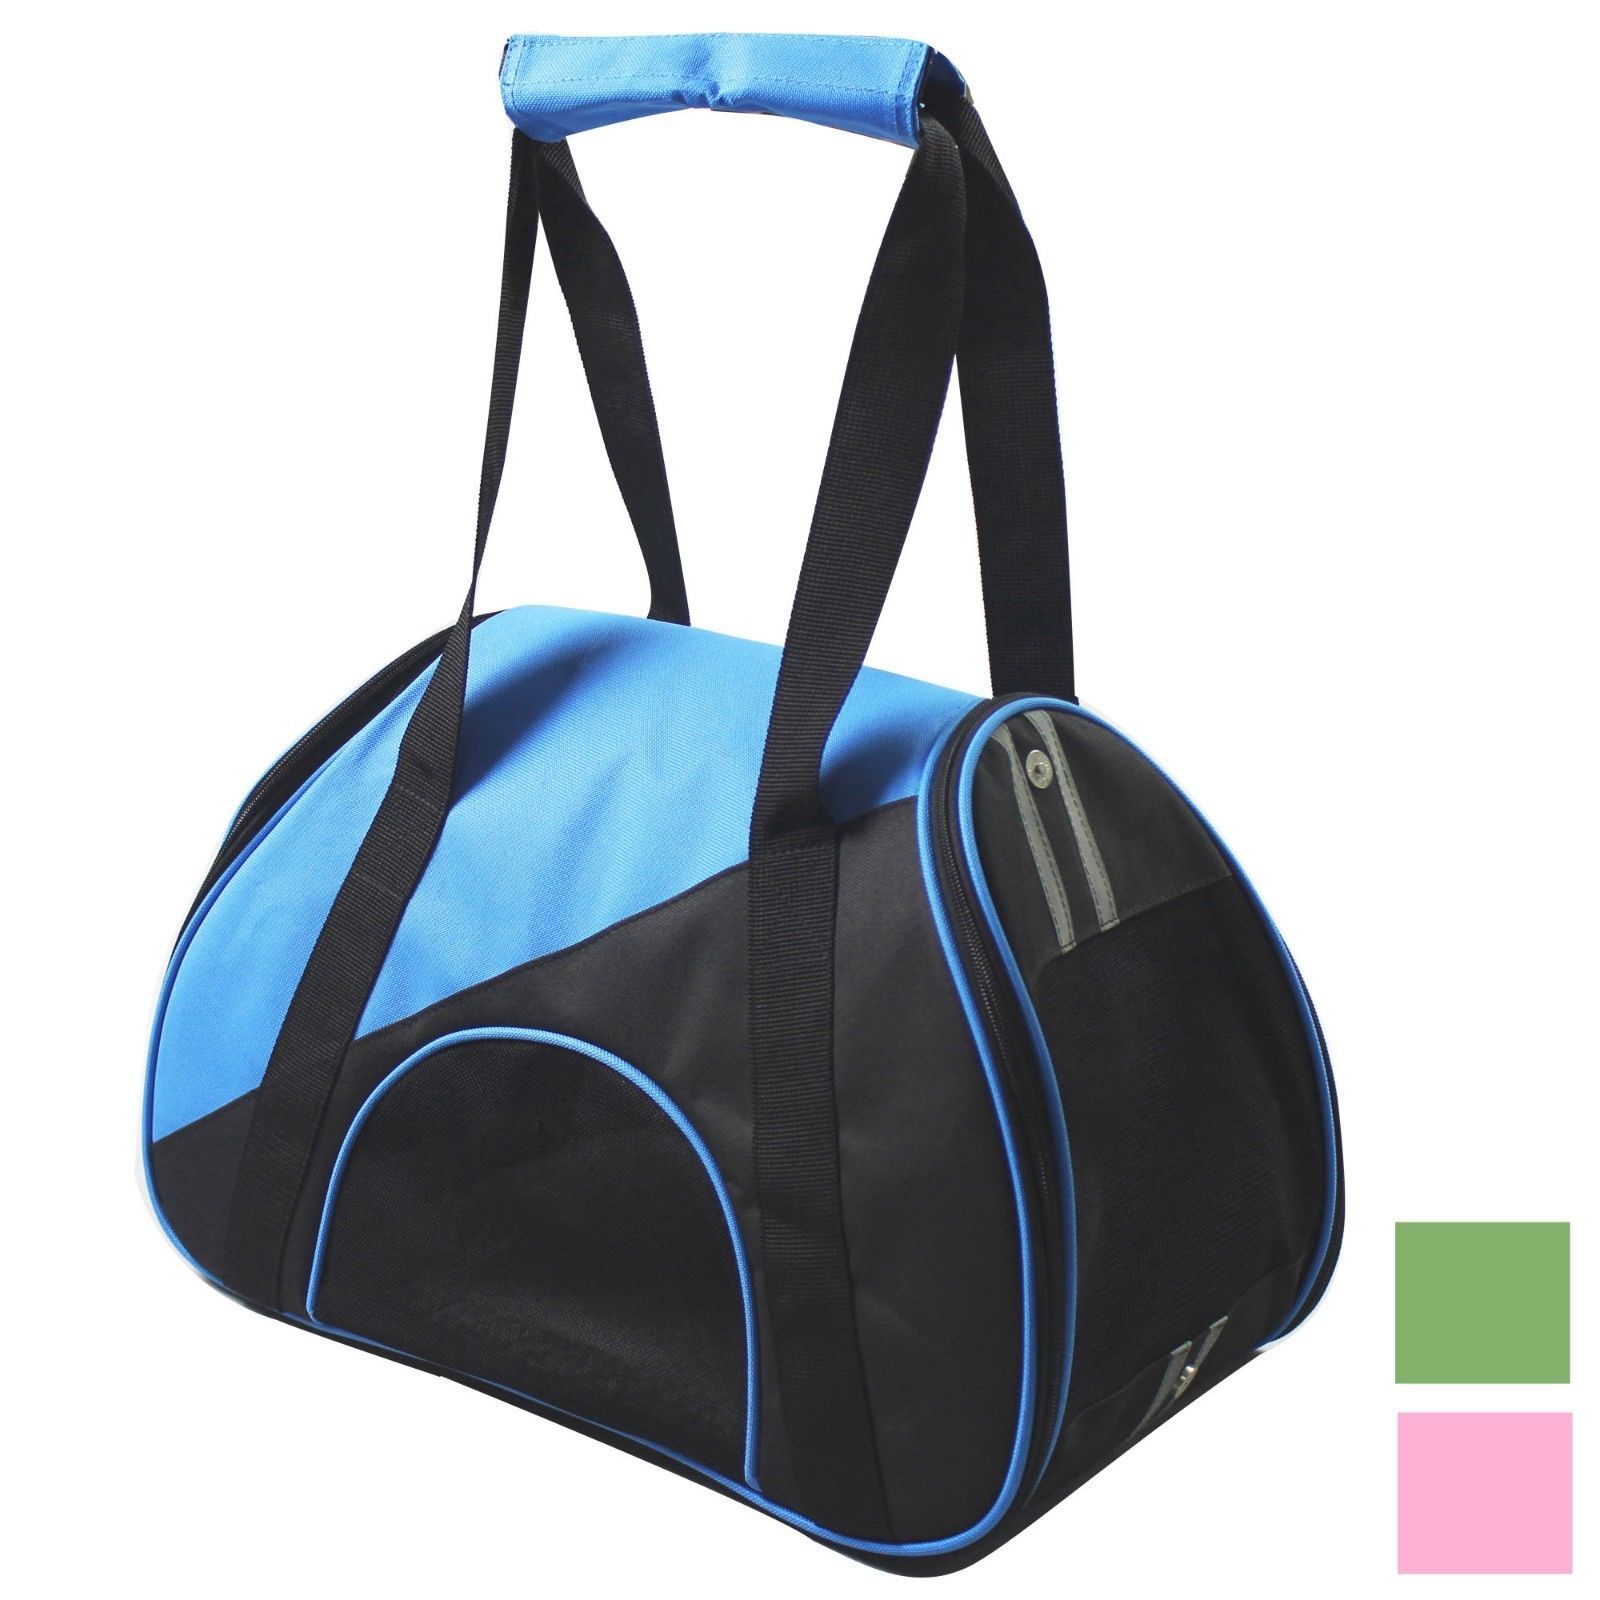 Primary image for Airline Approved Zip-N-Go Contoured Travel Fashion Pet Dog or Cat Carrier Bag